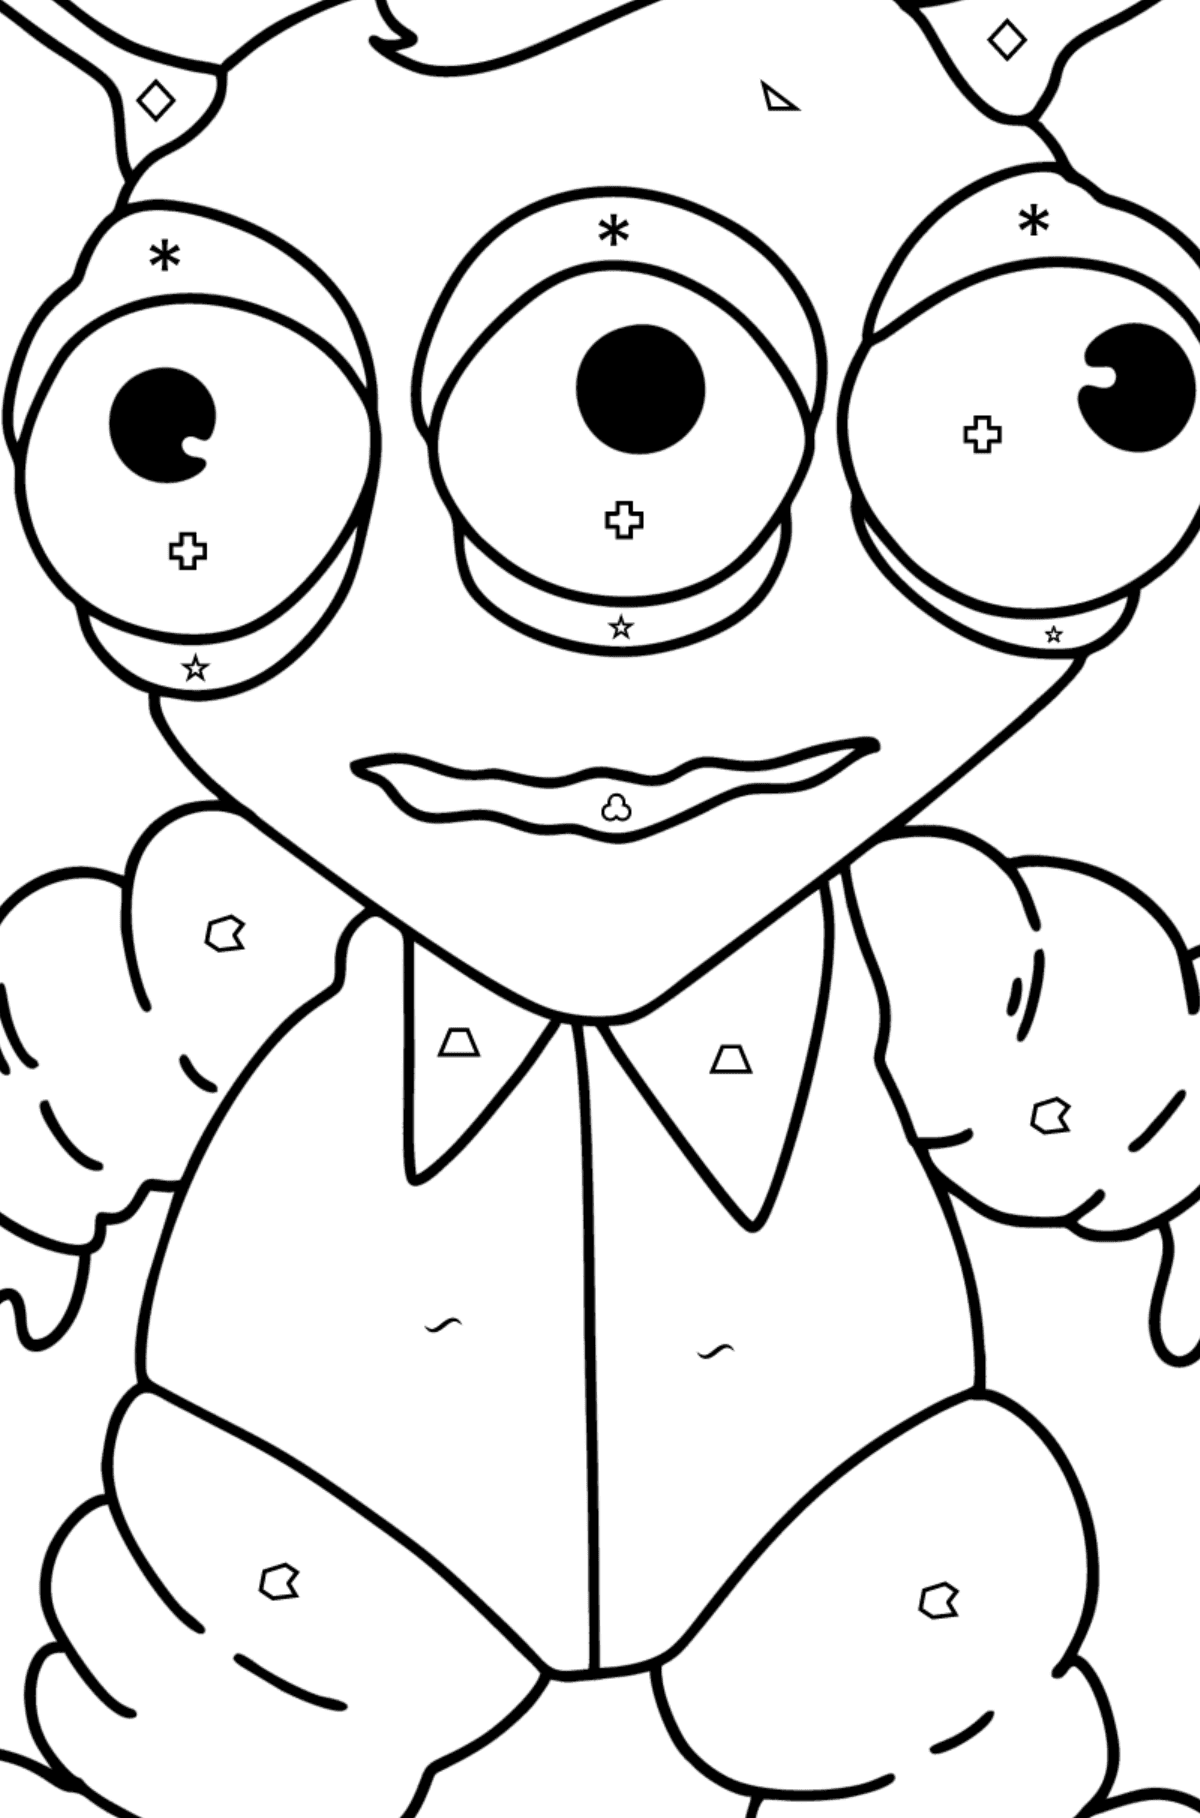 Cartoon Alien Coloring page - Coloring by Symbols and Geometric Shapes for Kids